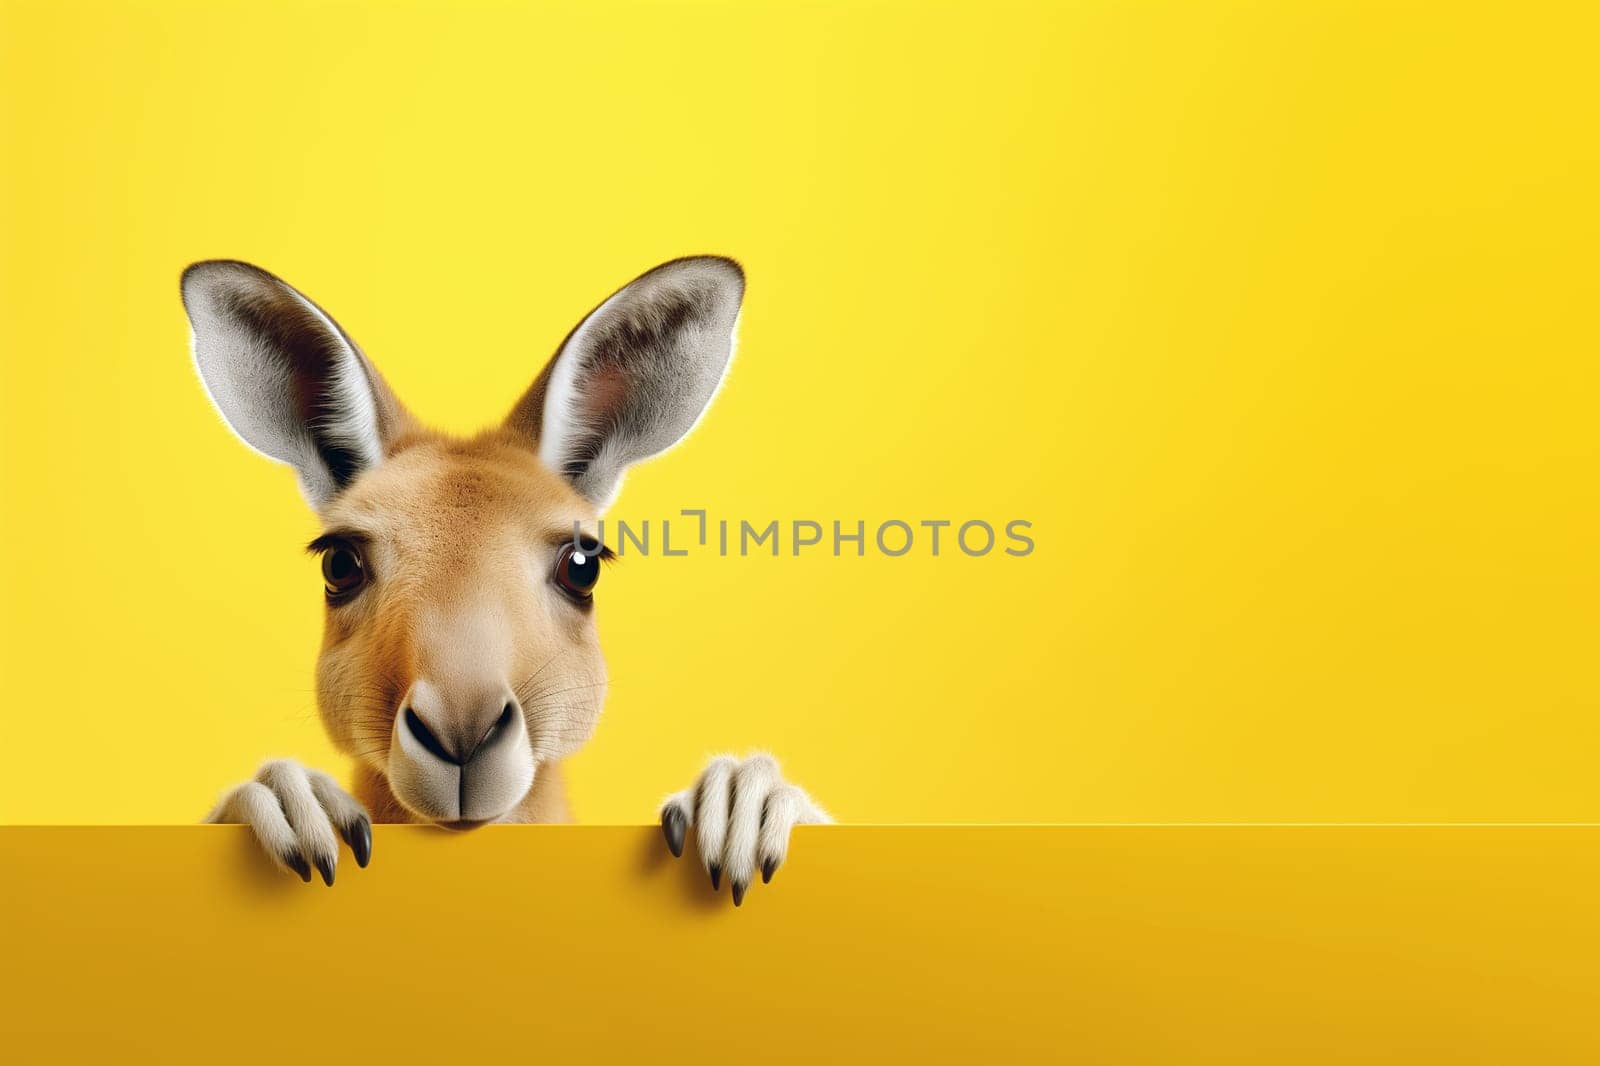 Funny lively kangaroo isolated on yellow background. Banner with kangaroo and copy space.